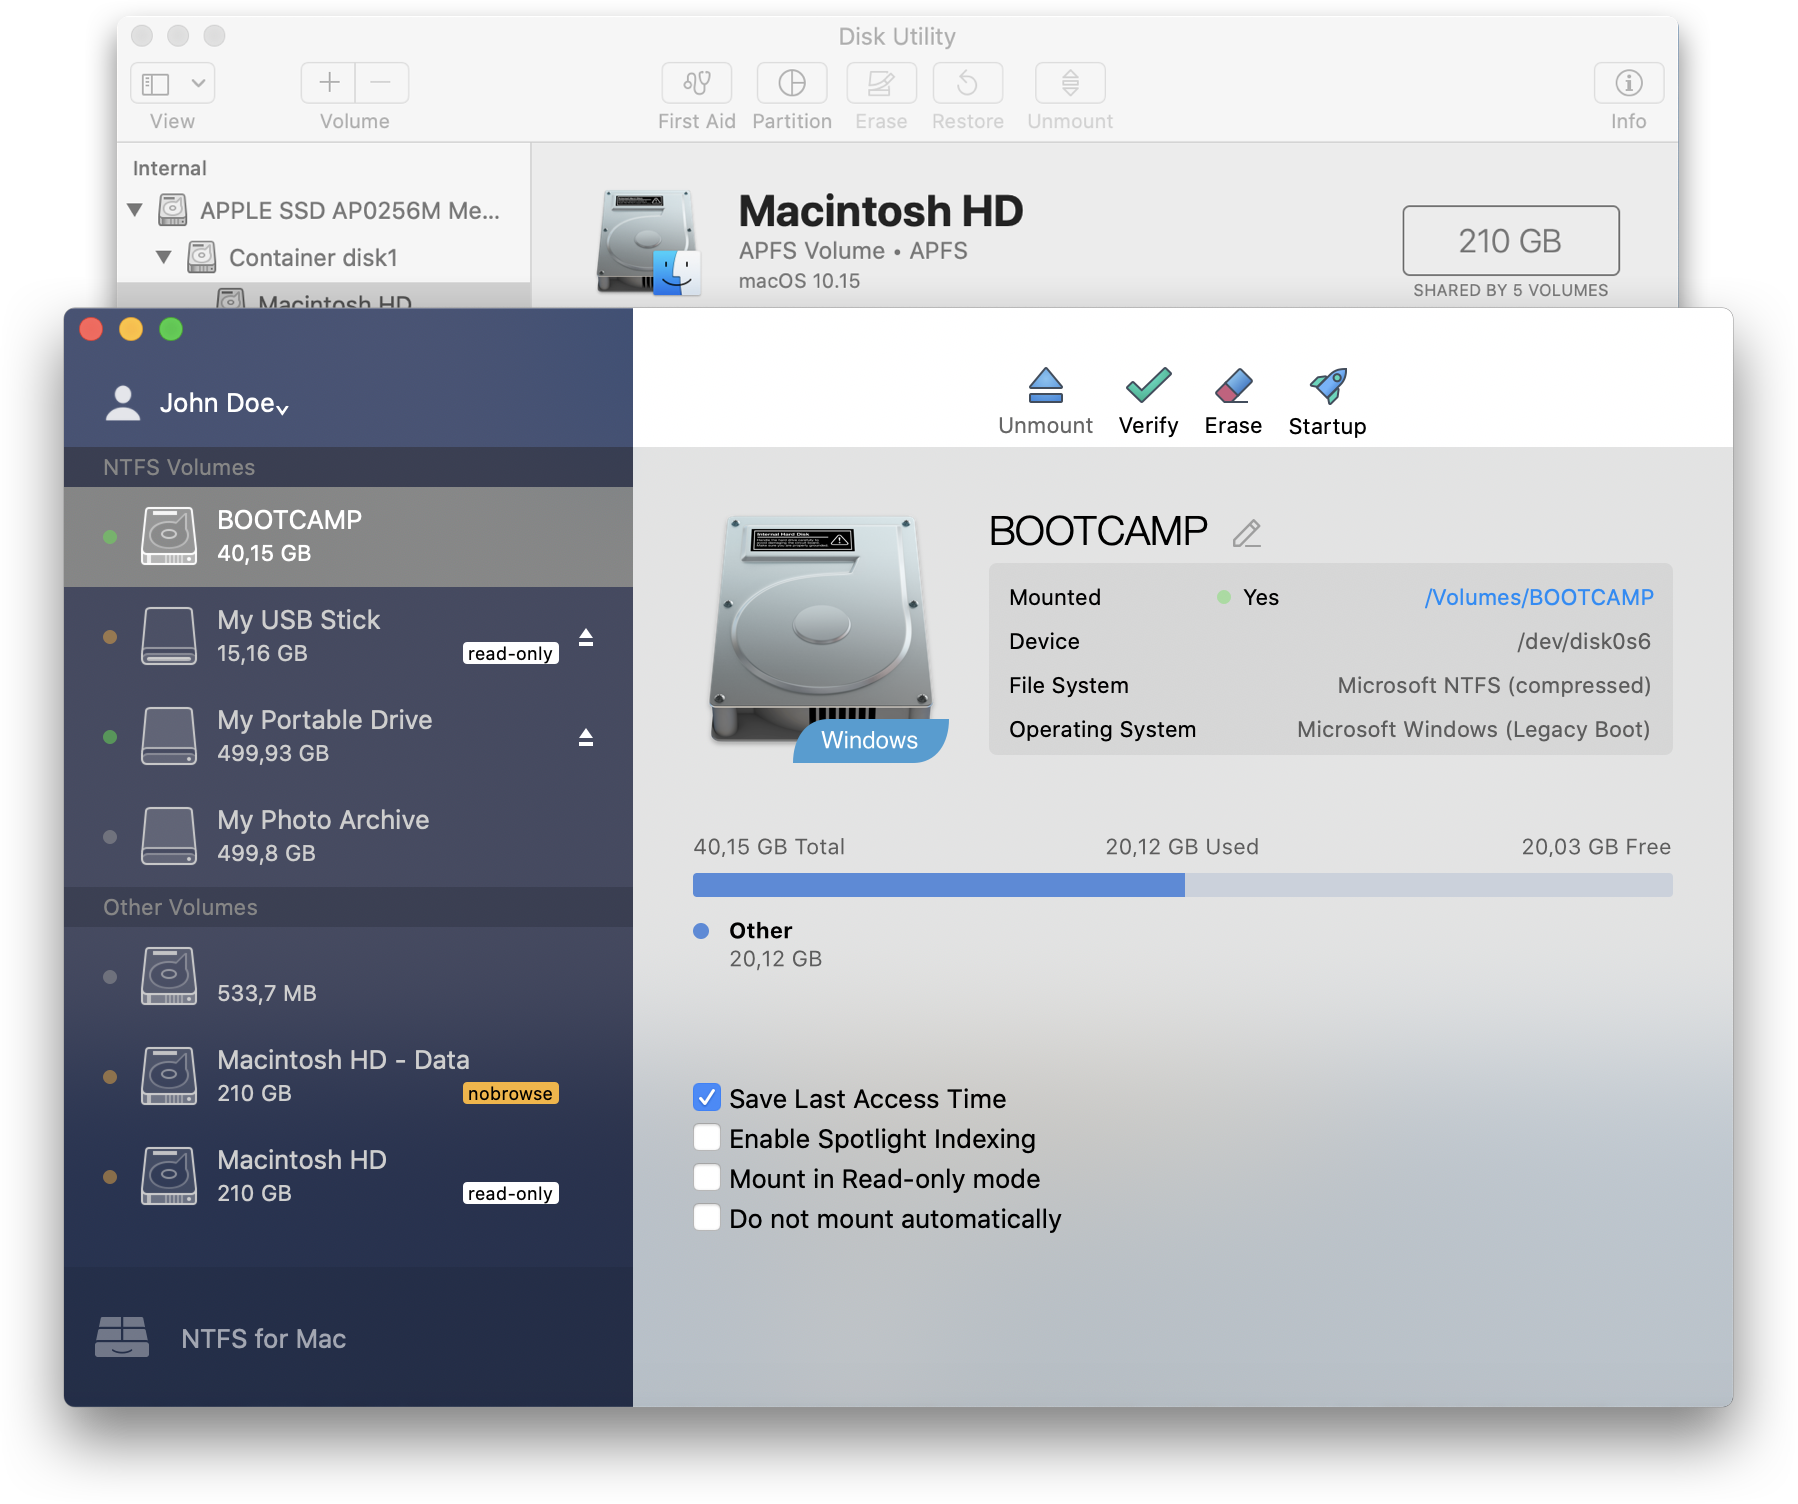 wd paragon driver for mac os